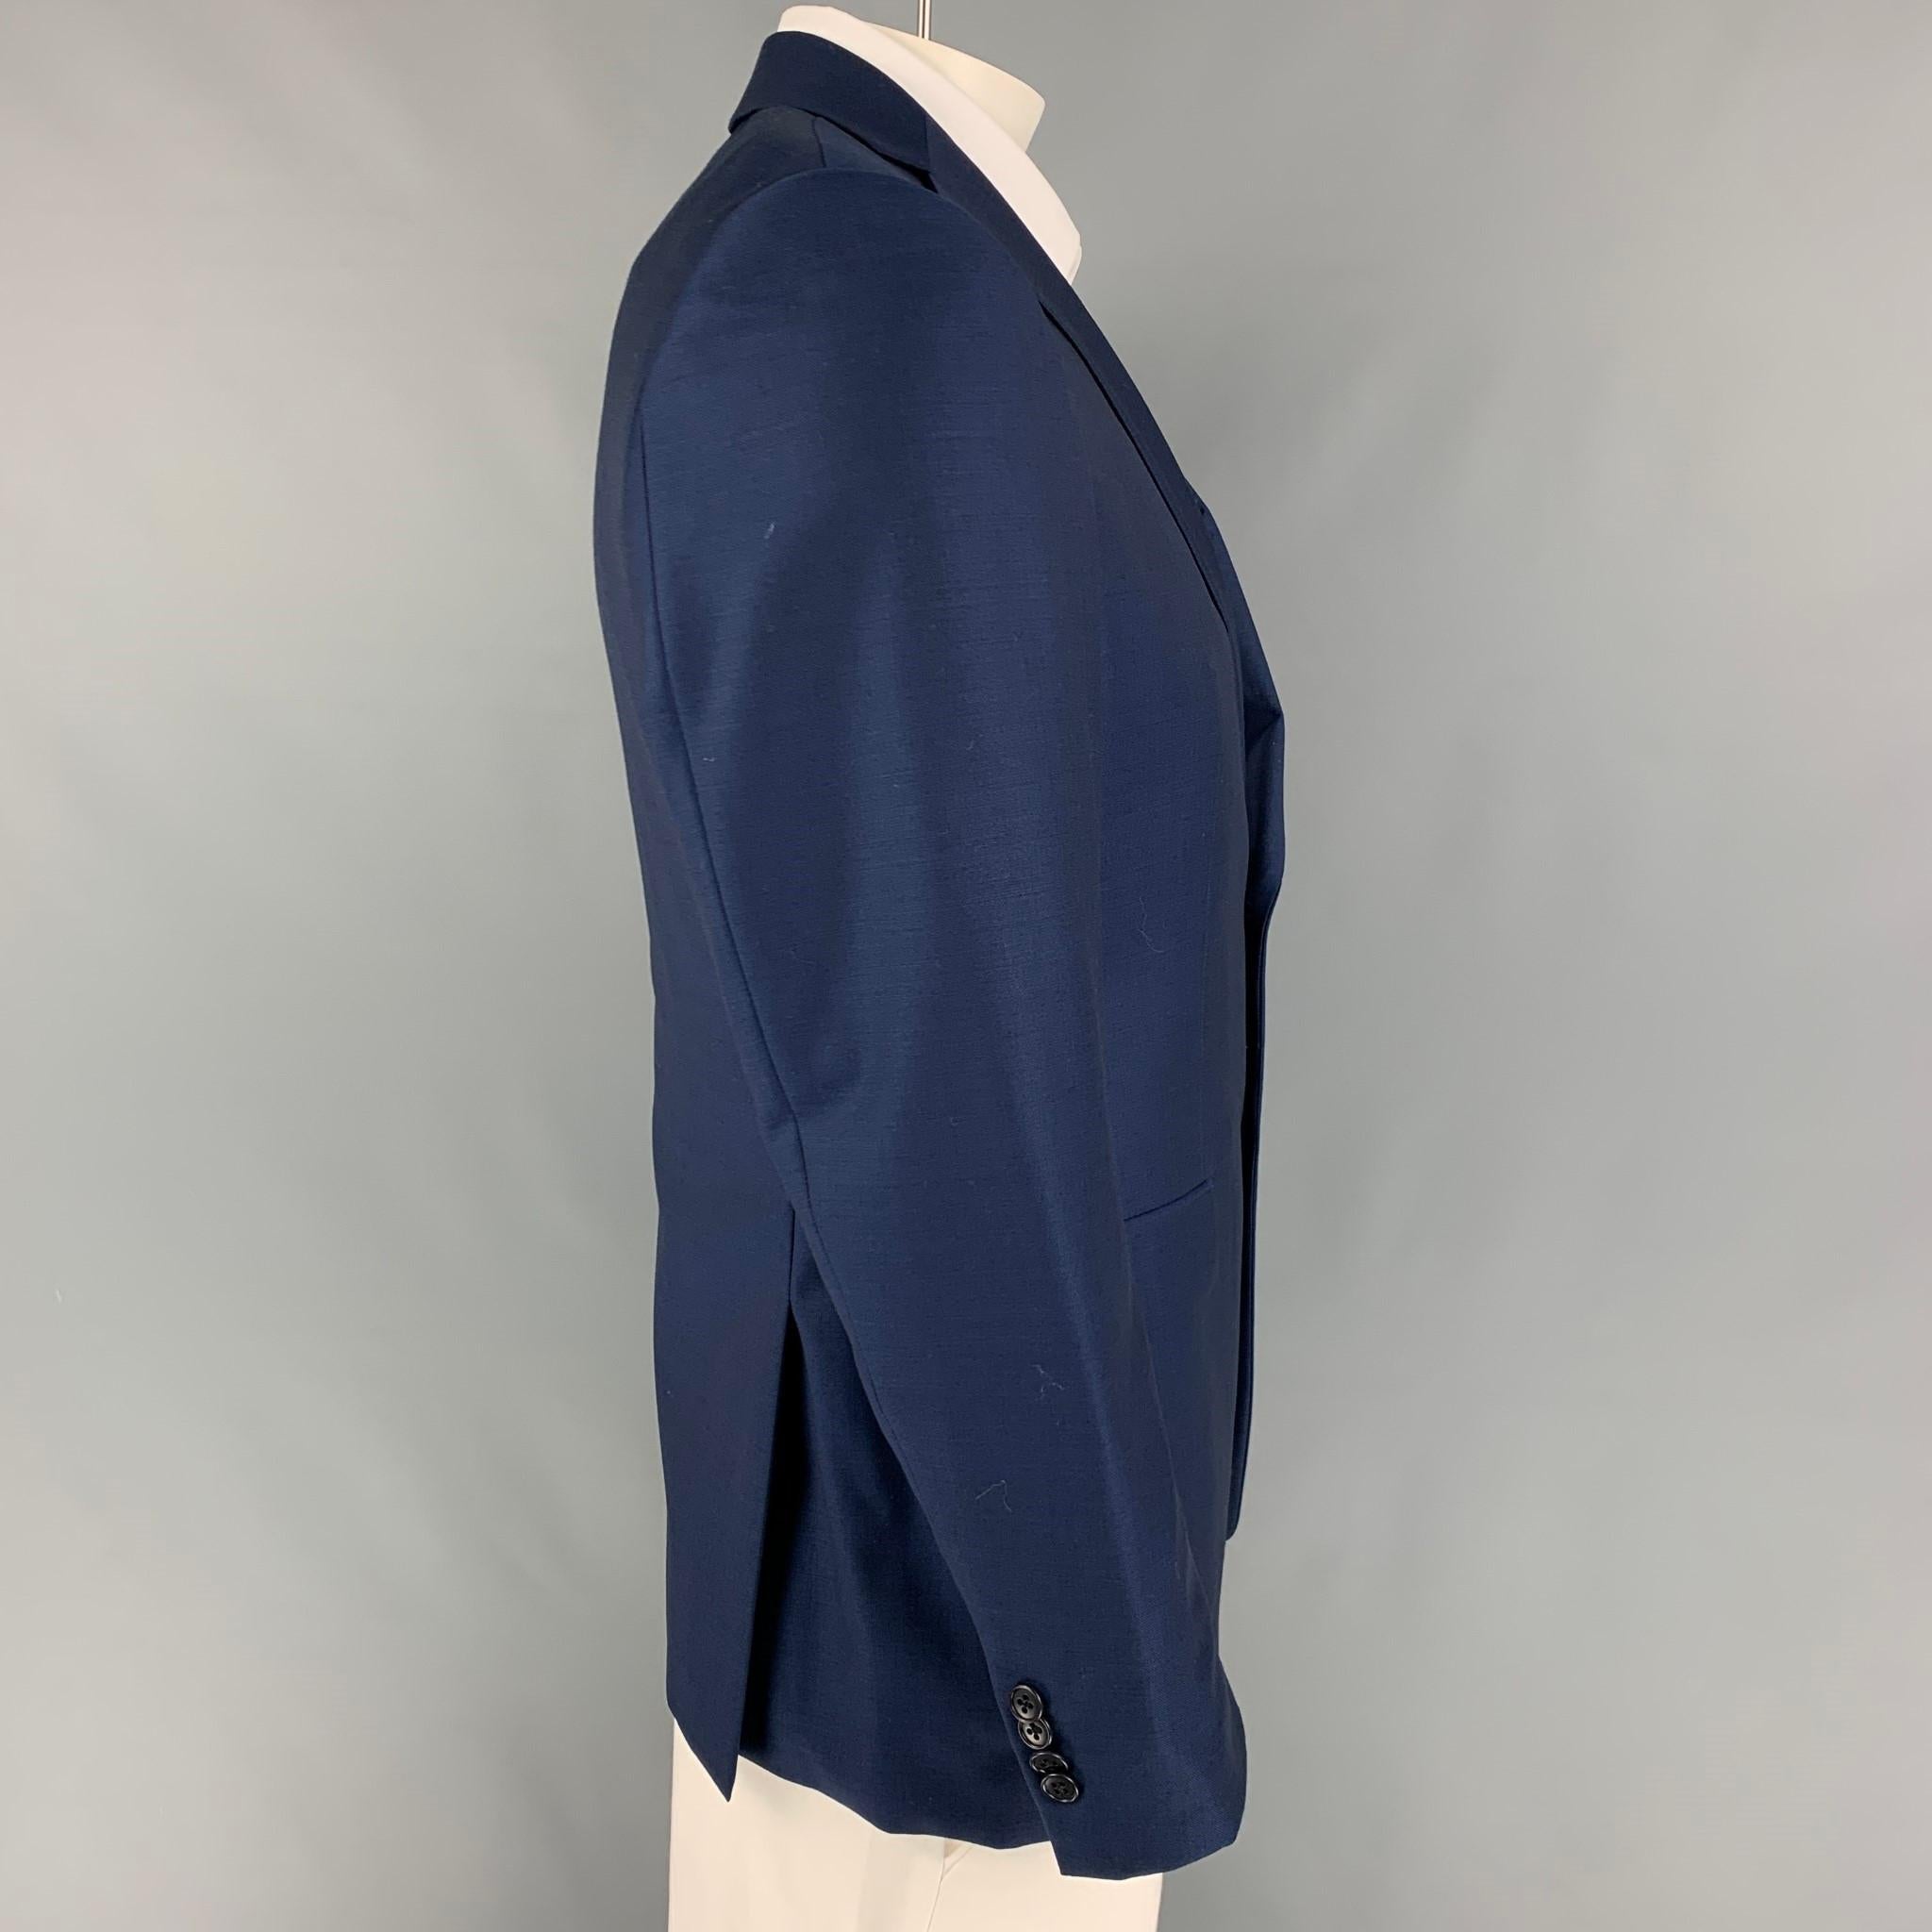 JOHN VARVATOS *U.S.A sport coat coms in a navy wool with a full liner featuring a notch lapel, flap pockets, double back vent, and a double button closure. 

Very Good Pre-Owned Condition.
Marked: 40 R

Measurements:

Shoulder: 18 in.
Chest: 40